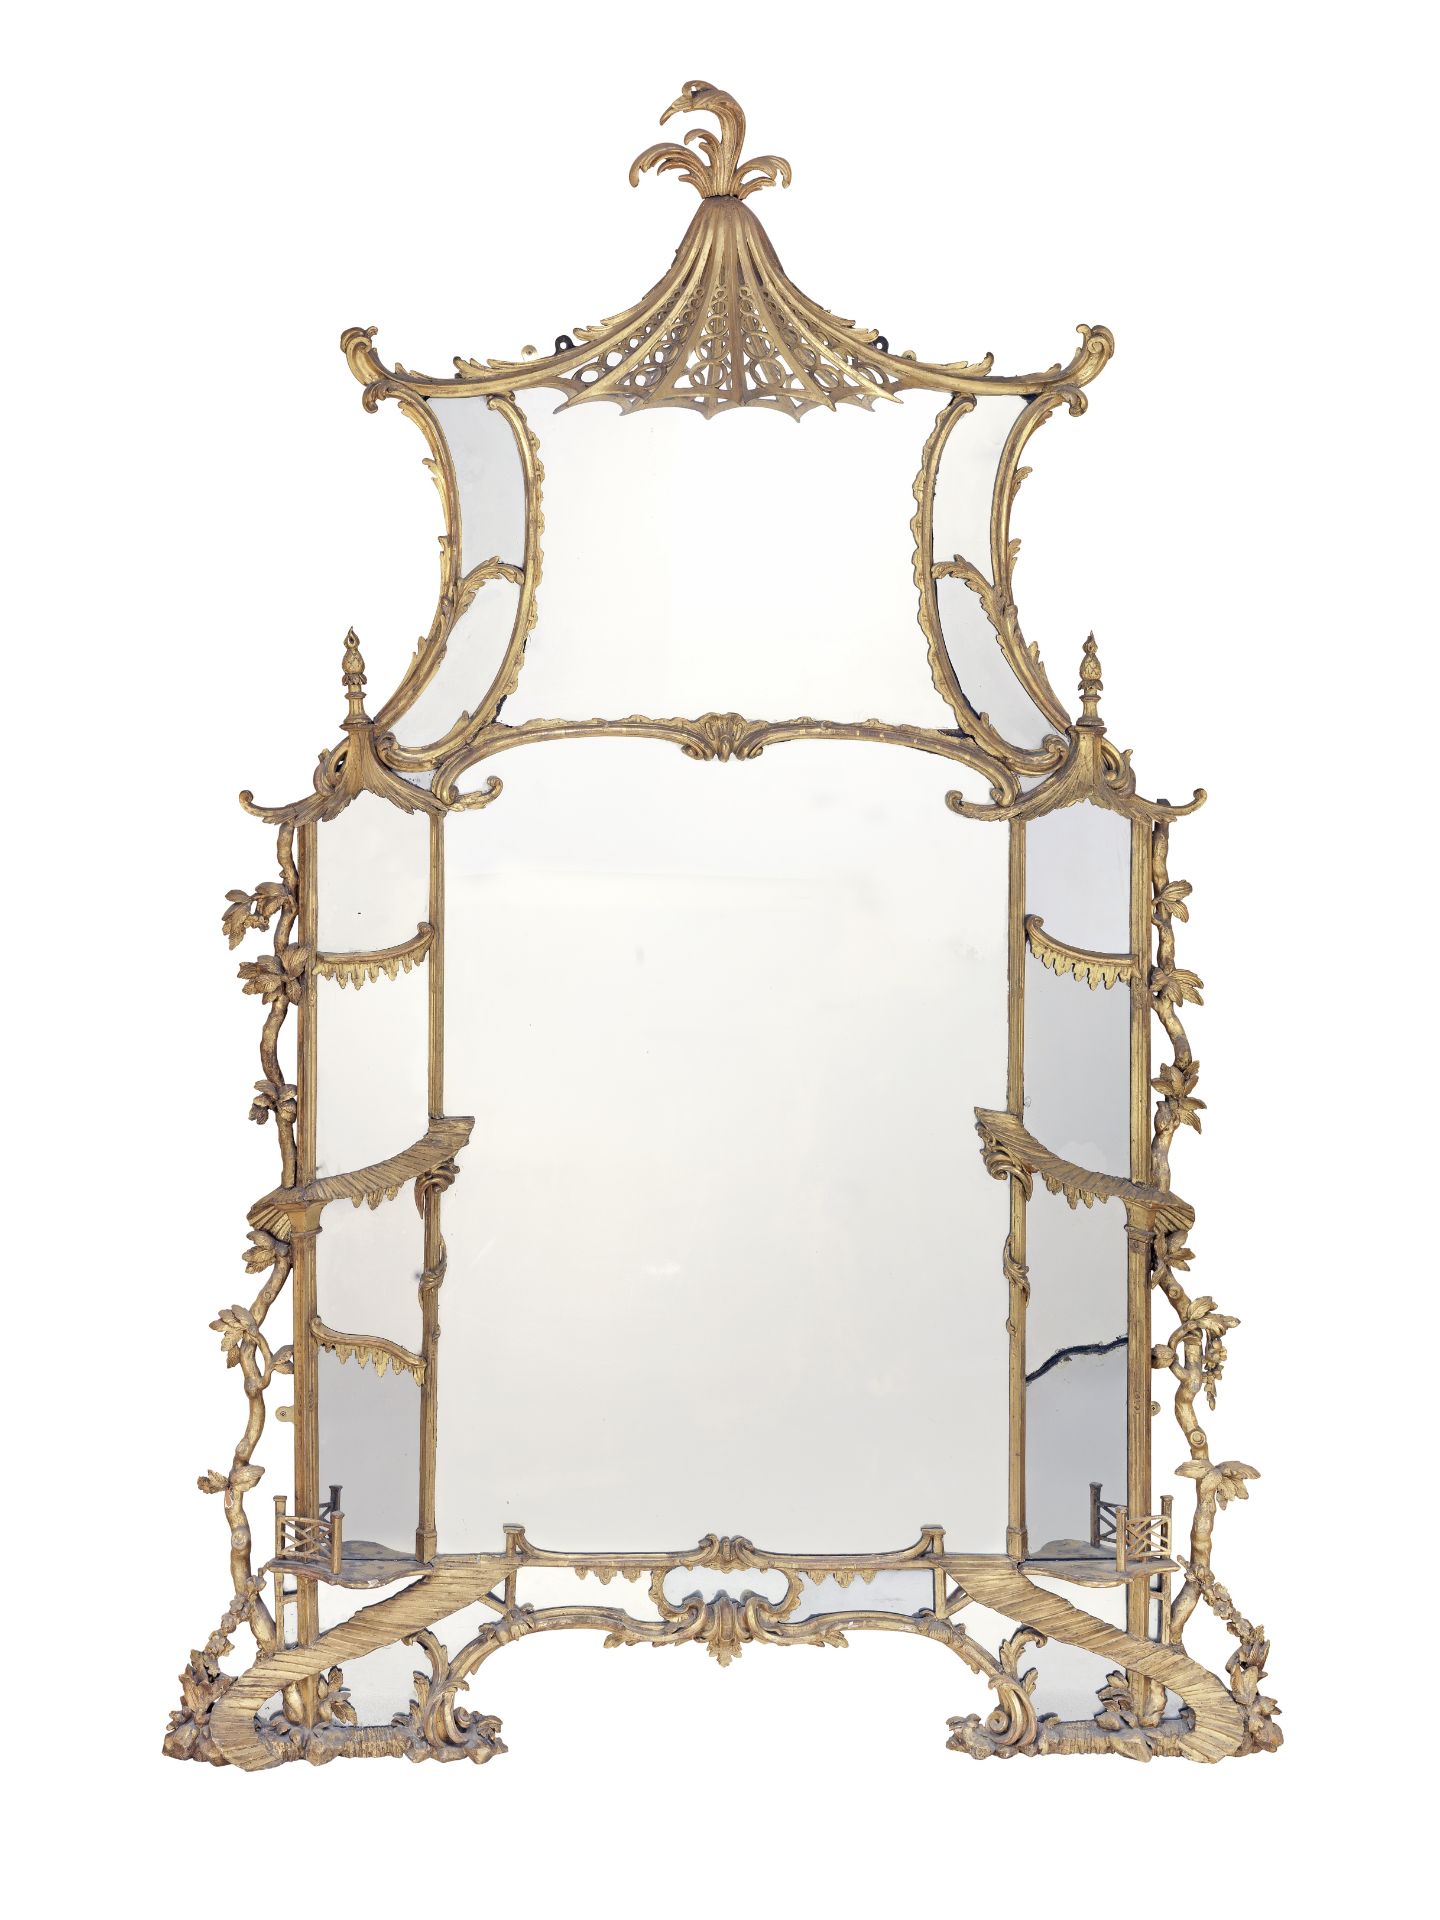 A George II carved giltwood overmantel or pier mirror possibly by William and John Linnell